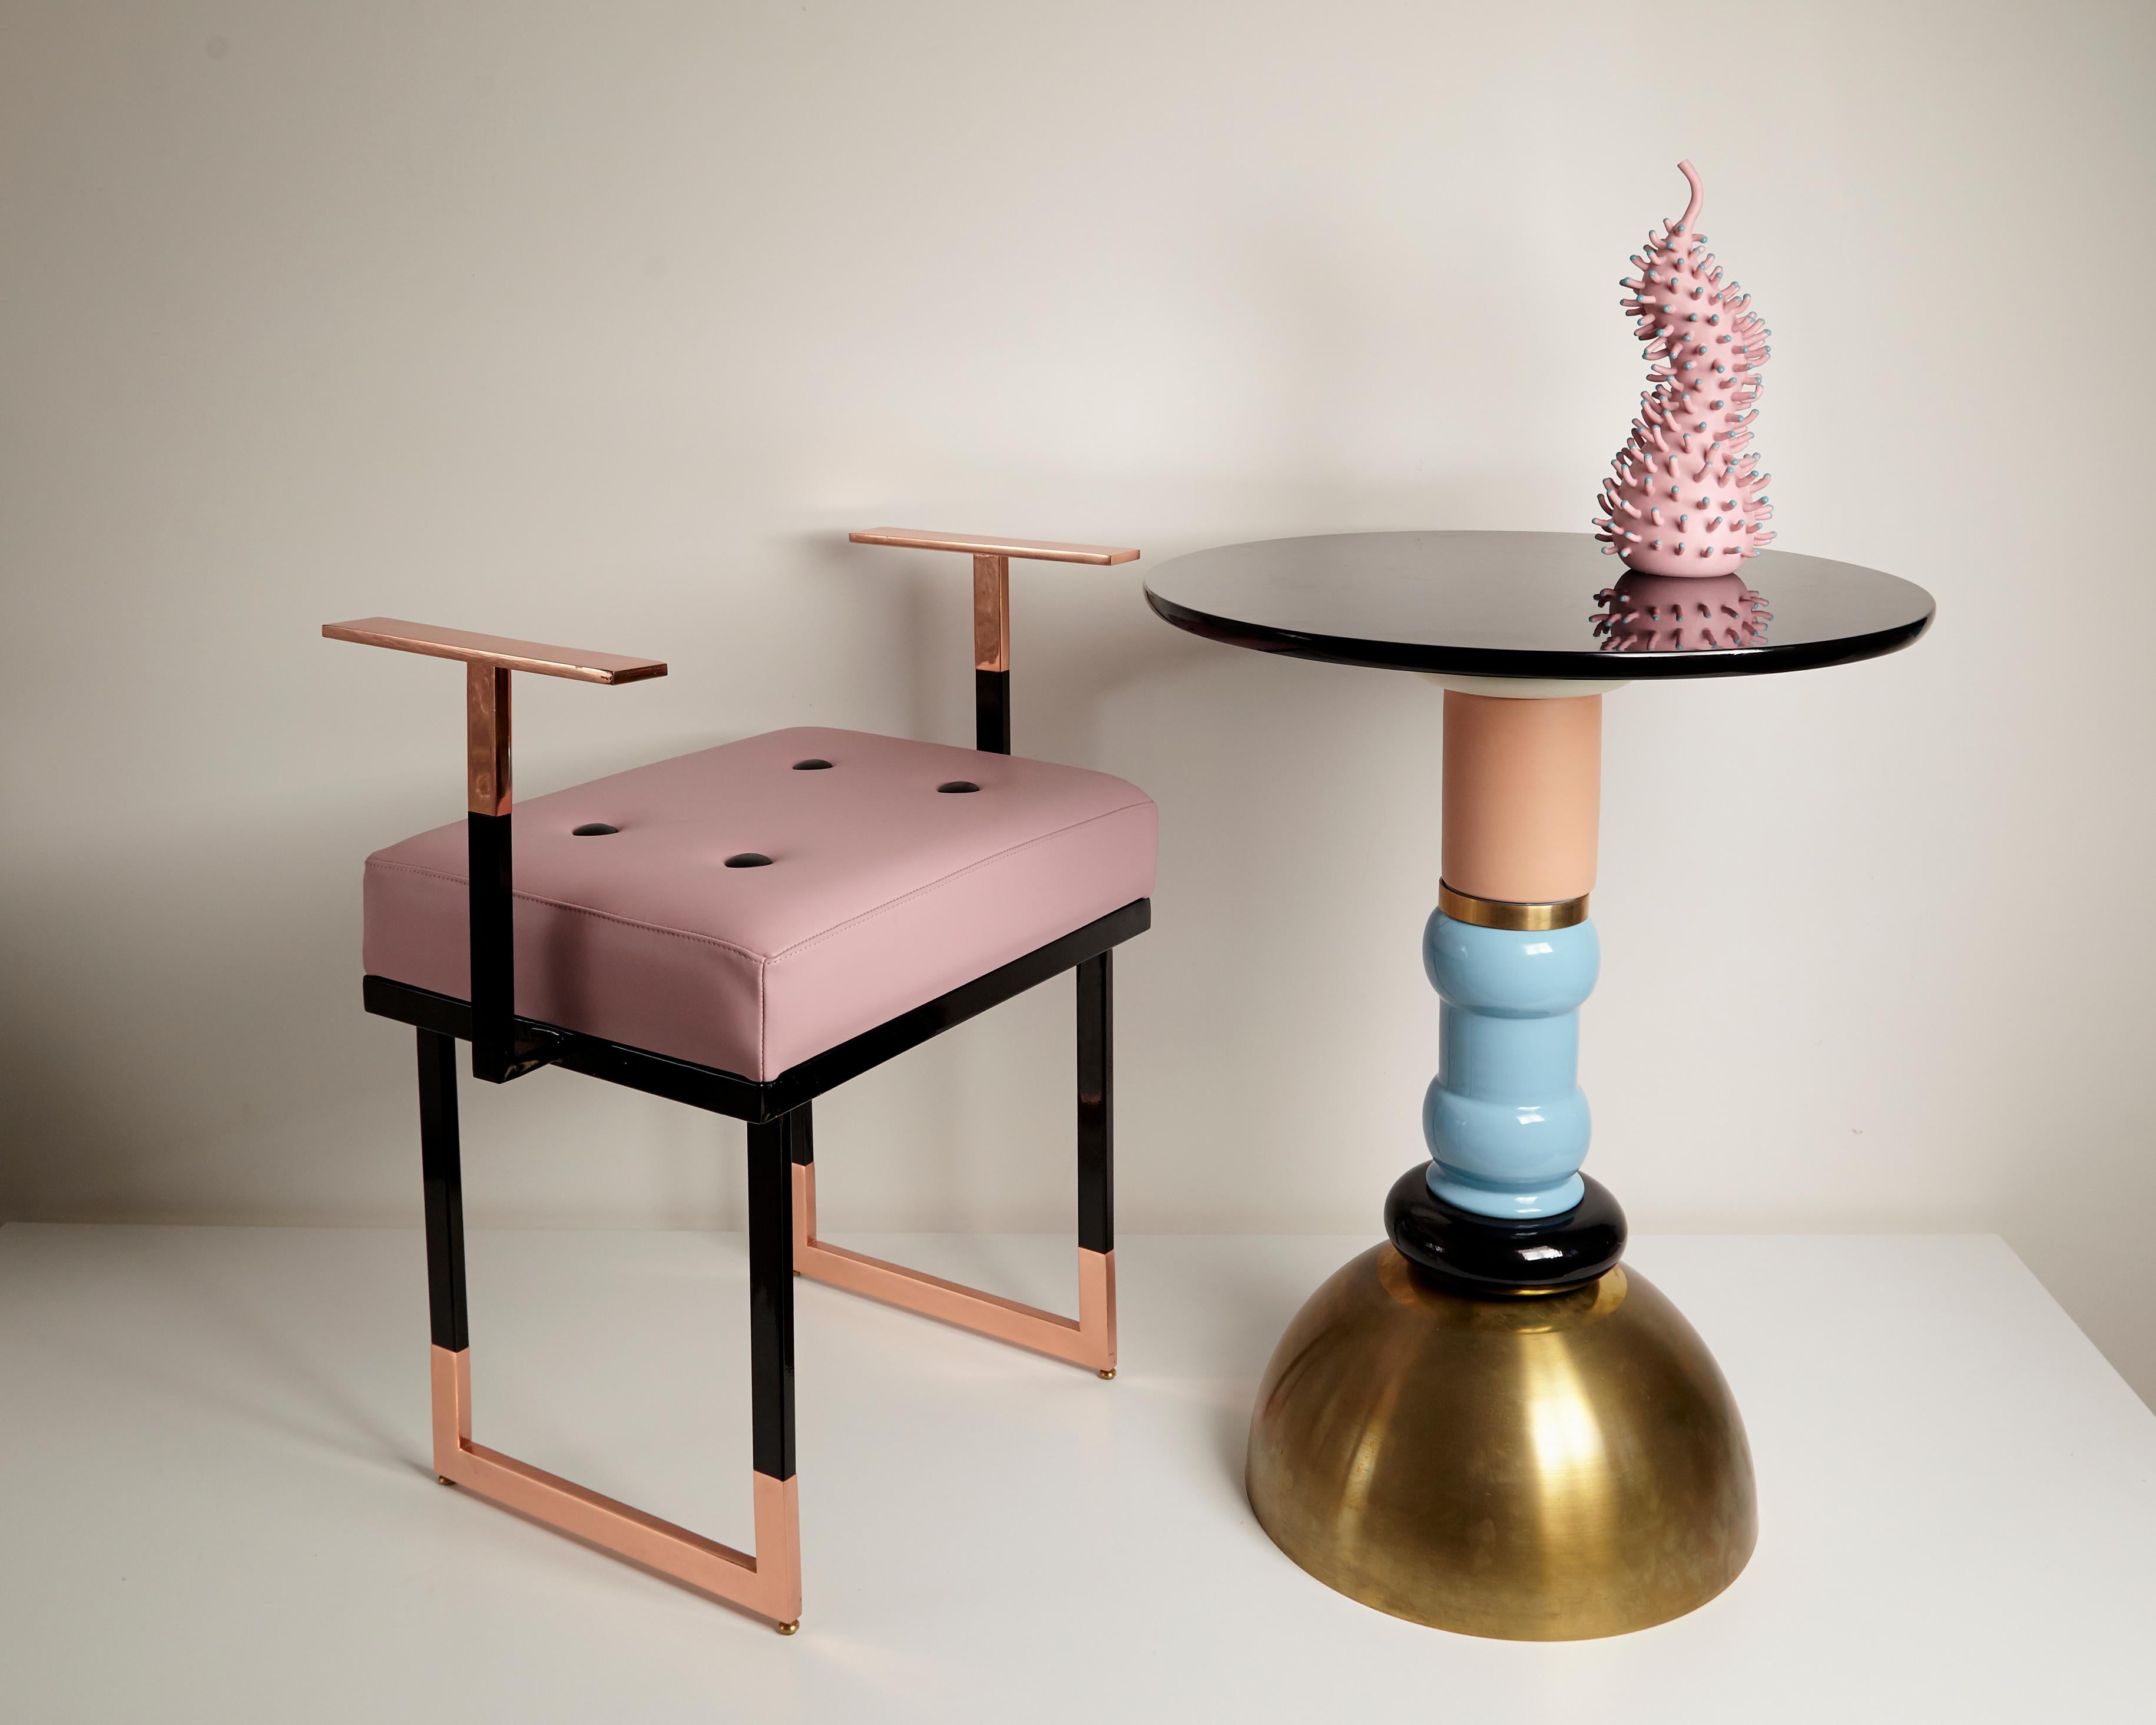 Totem table in brass, wood and ceramic. Handmade in Italy by Nicola Falcone

This elegant and stately table in ceramic from Montelupo (Tuscany), natural brass and wood is inspired by the ancient Totem, allowing it to make a towering item in any